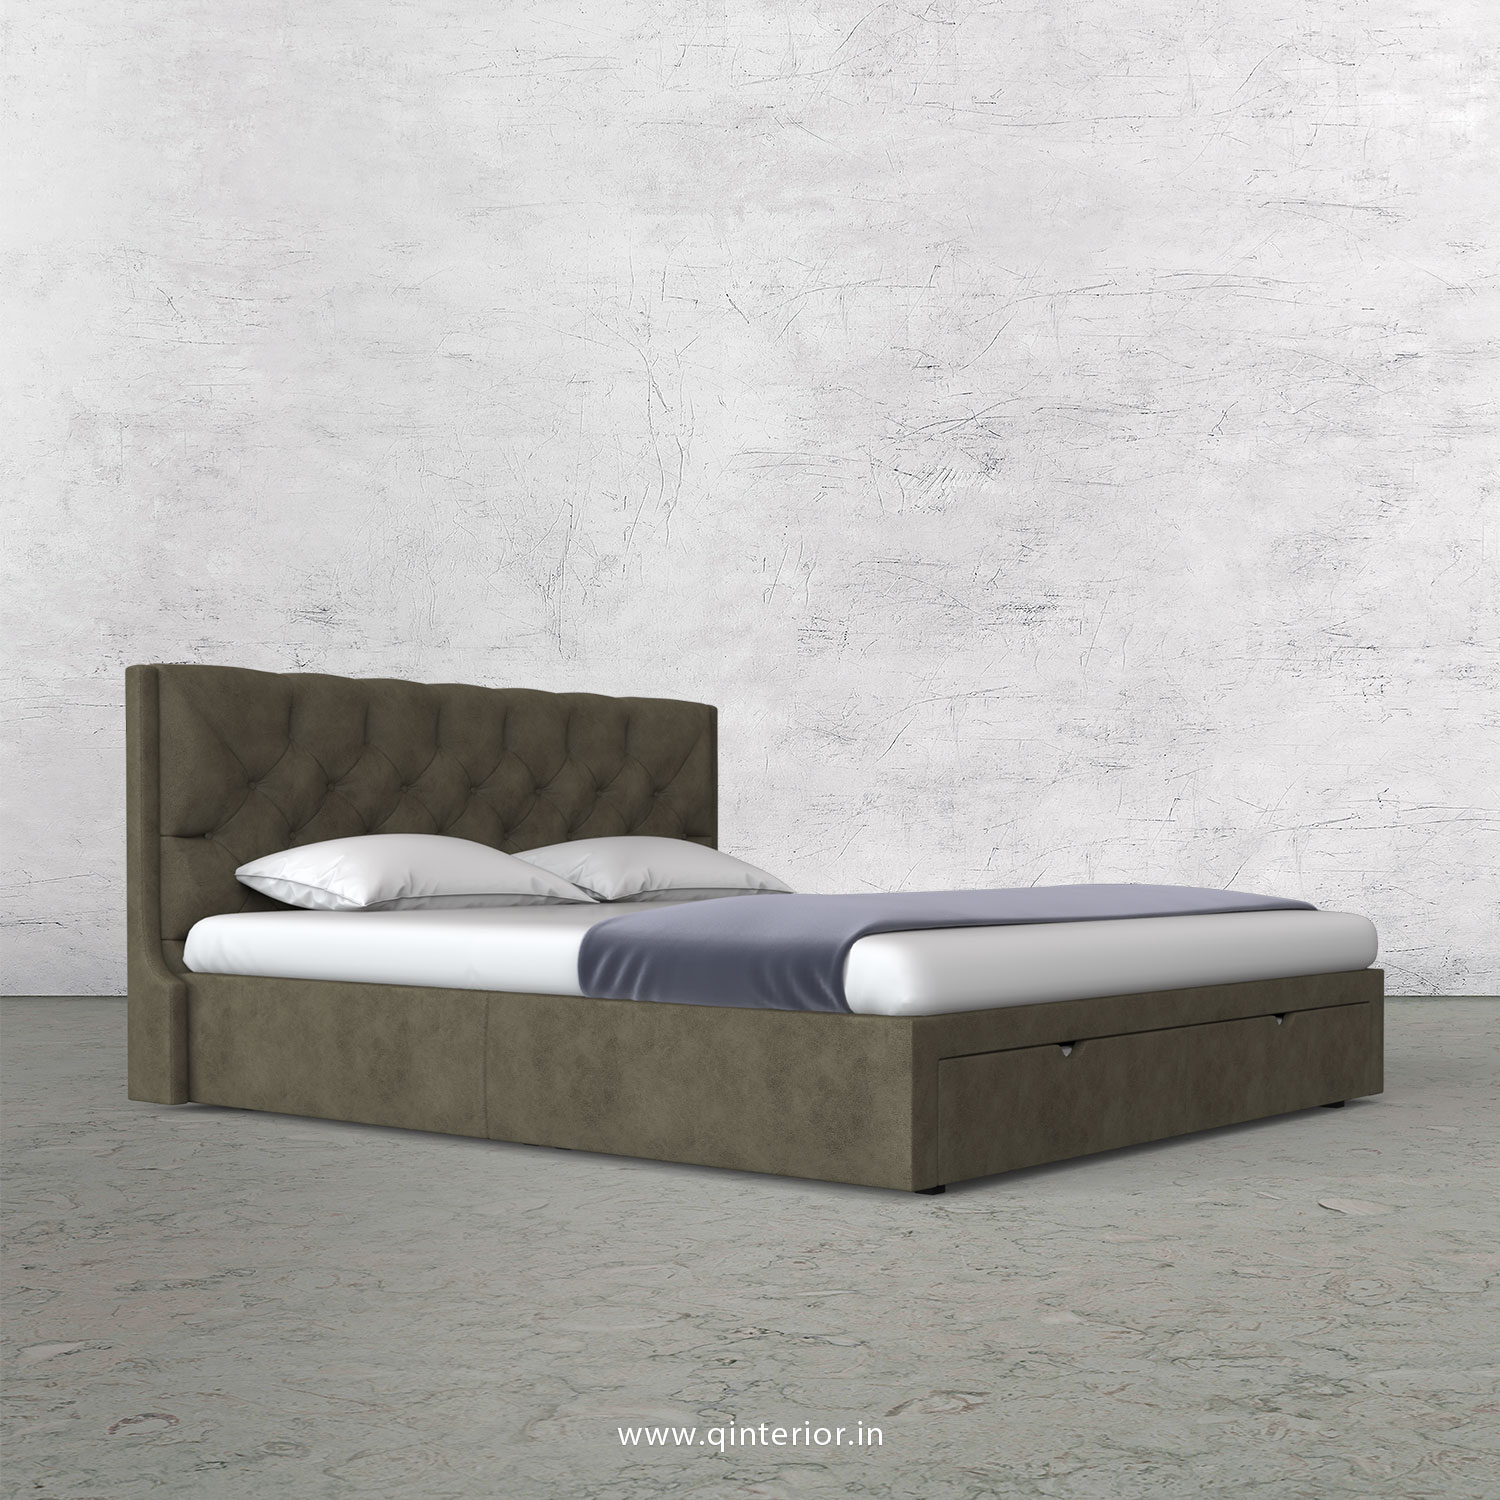 Scorpius Queen Storage Bed in Fab Leather Fabric - QBD001 FL03